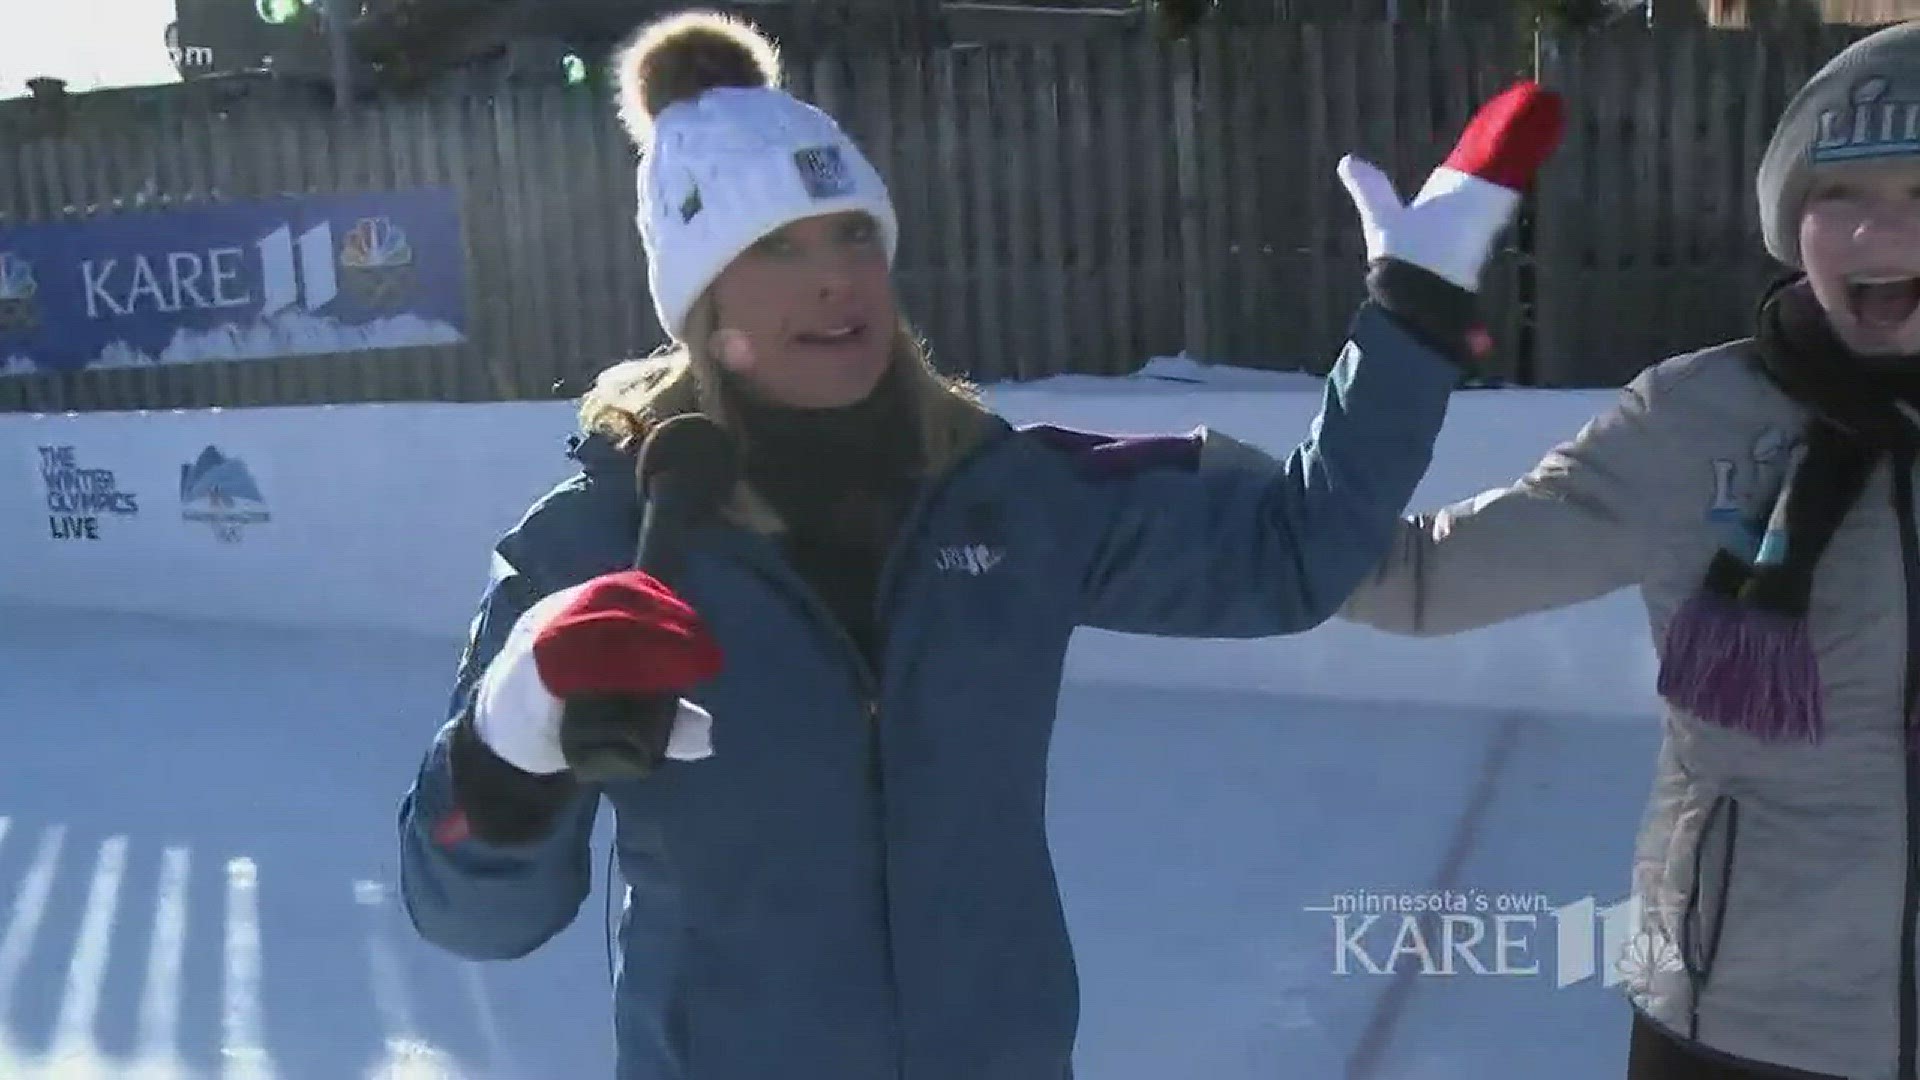 Karla Hult is joined by synchronized figure skaters in Kare 11's front yard at the UCare Ice Rink.